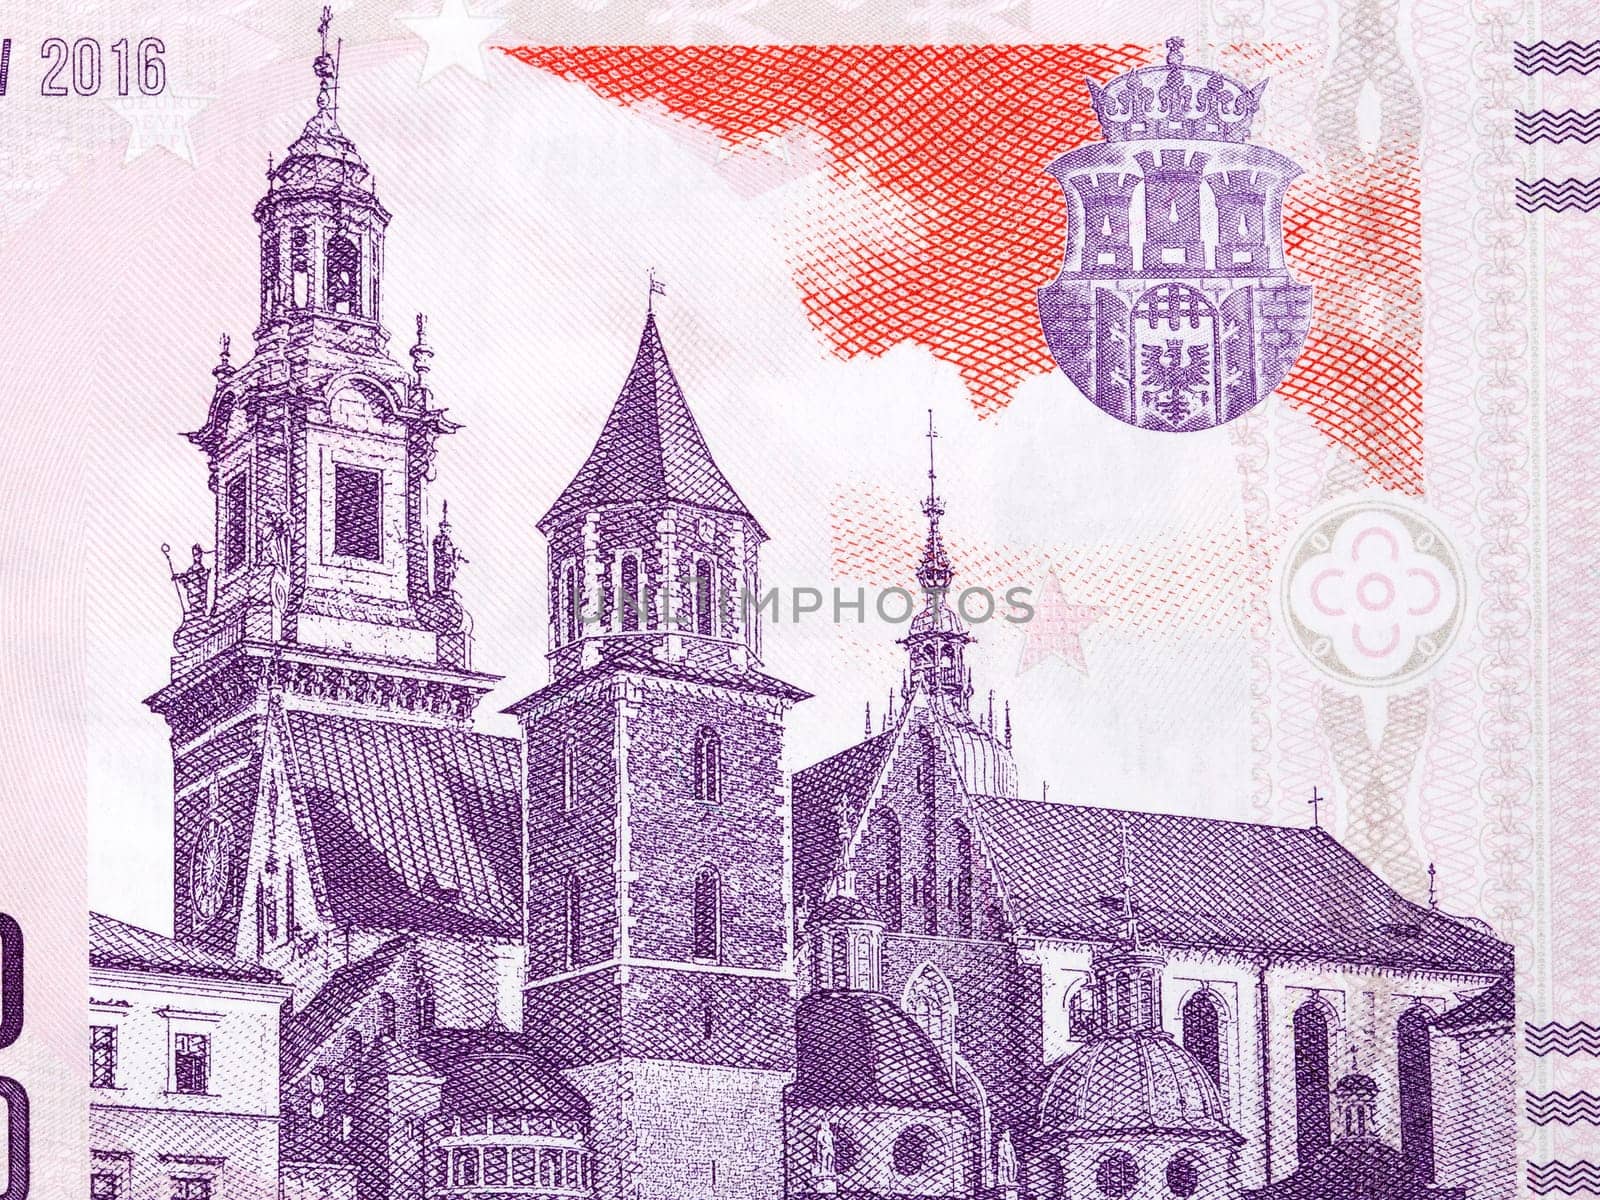 View of the Wawel Cathedral from Polish money